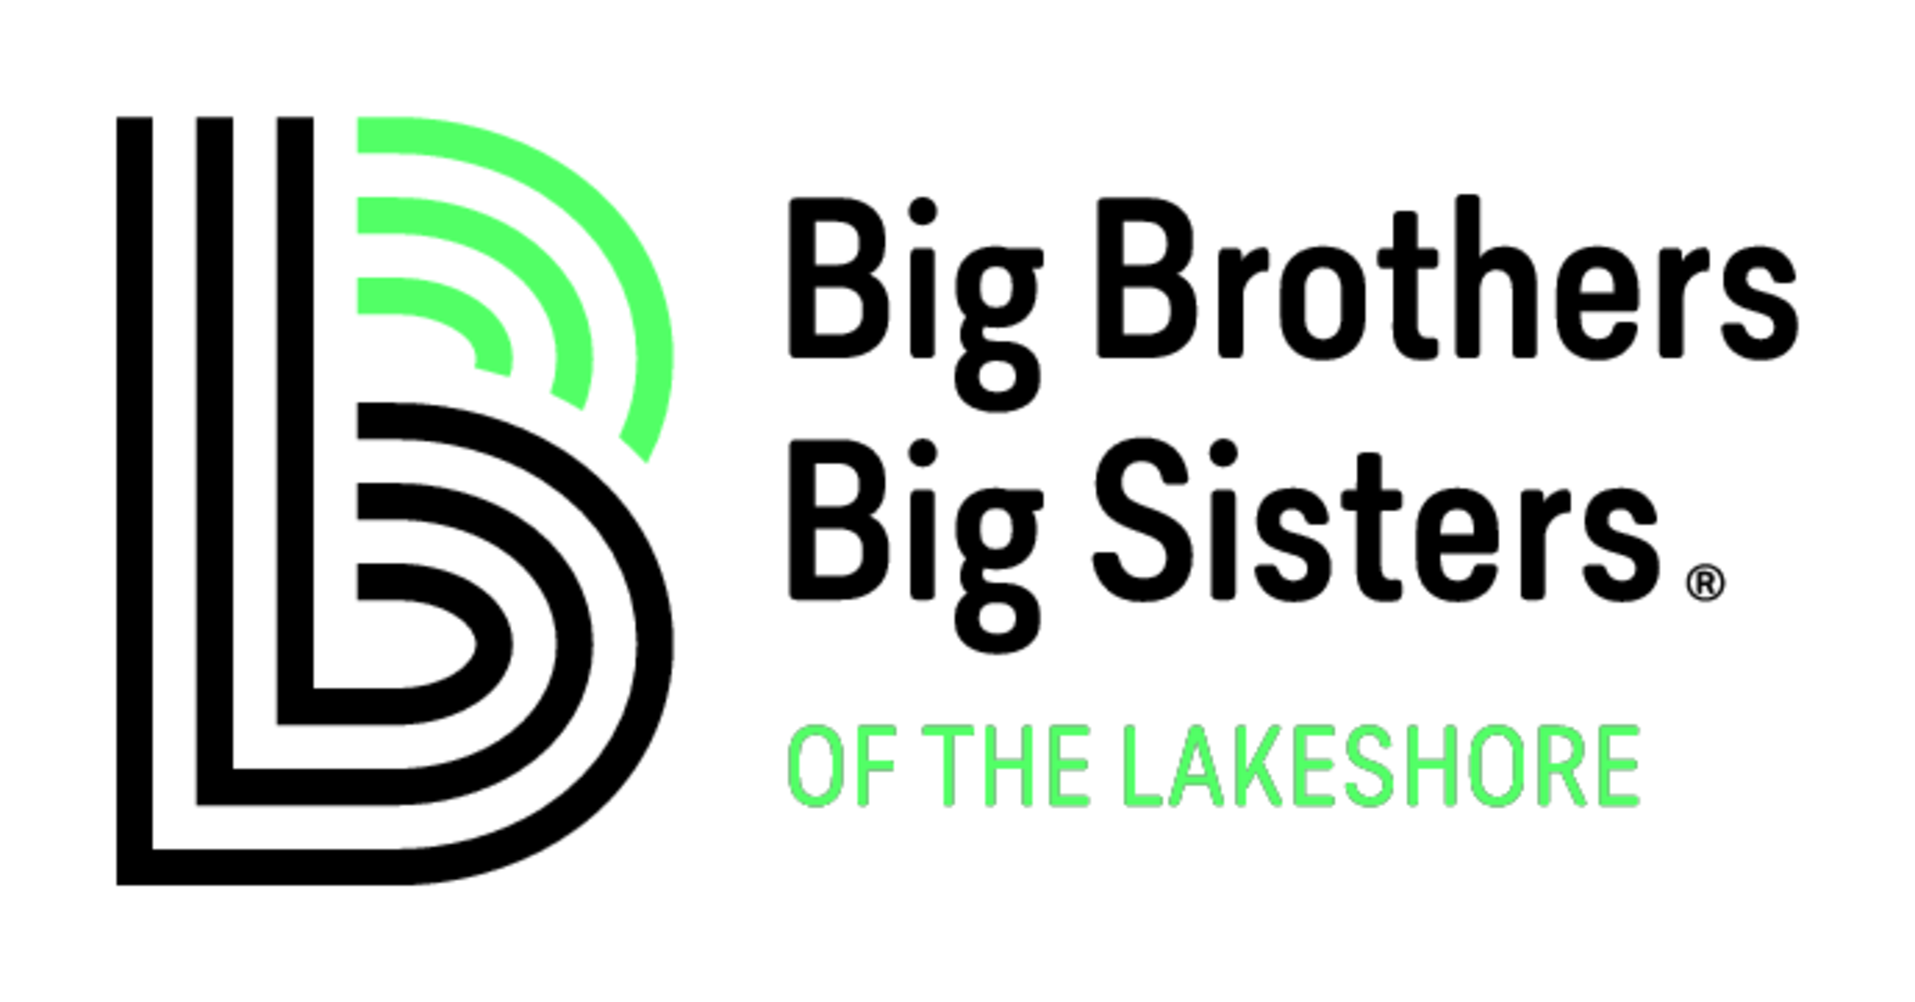 Big Brothers Big Sisters of the Lakeshore